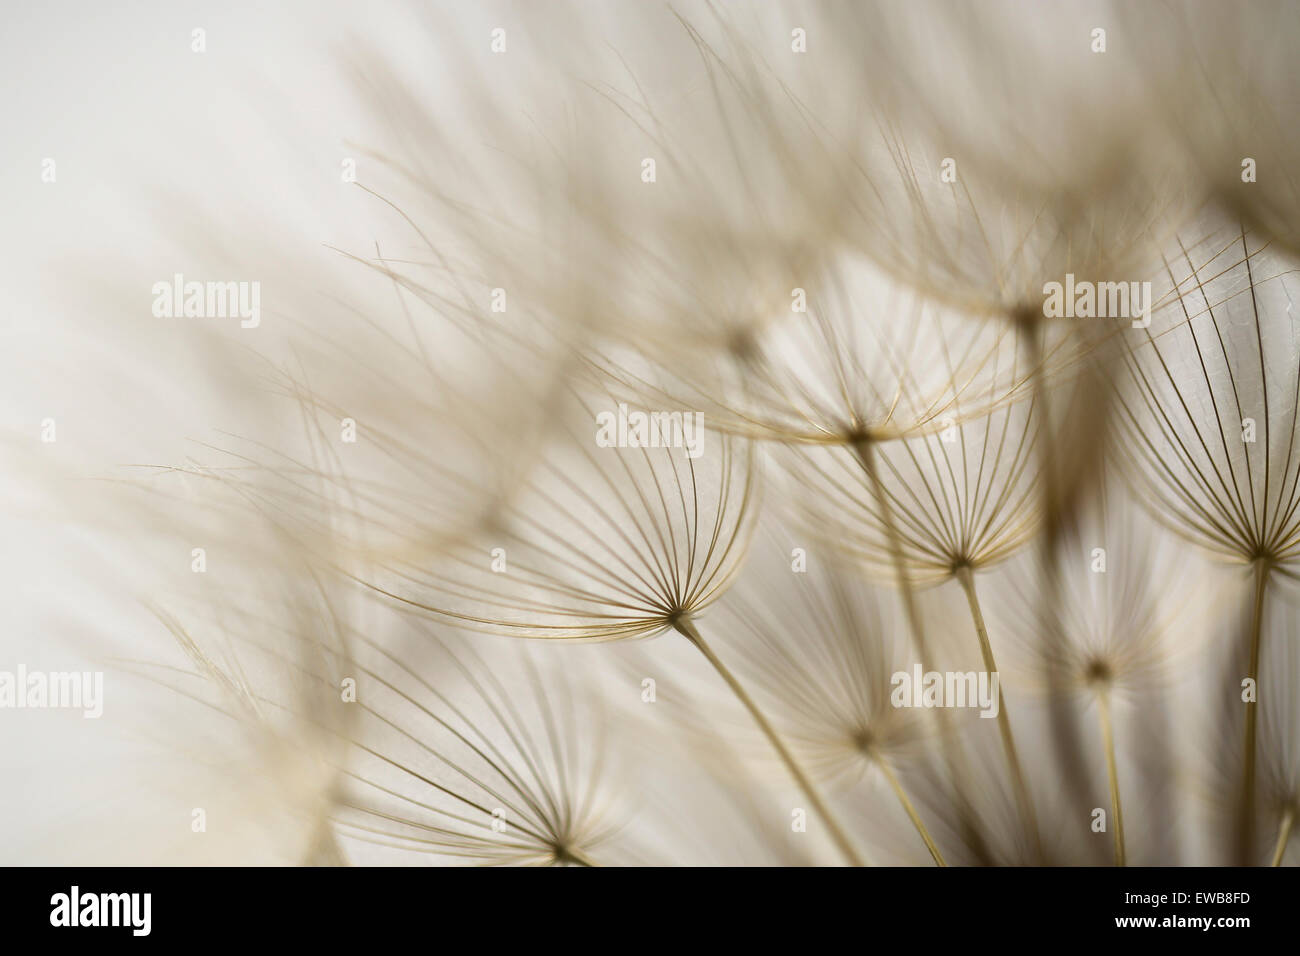 Dandelion family, Geropogon hybridus is native to the Mediterranean and adjacent areas. Photographed in Israel in March Stock Photo